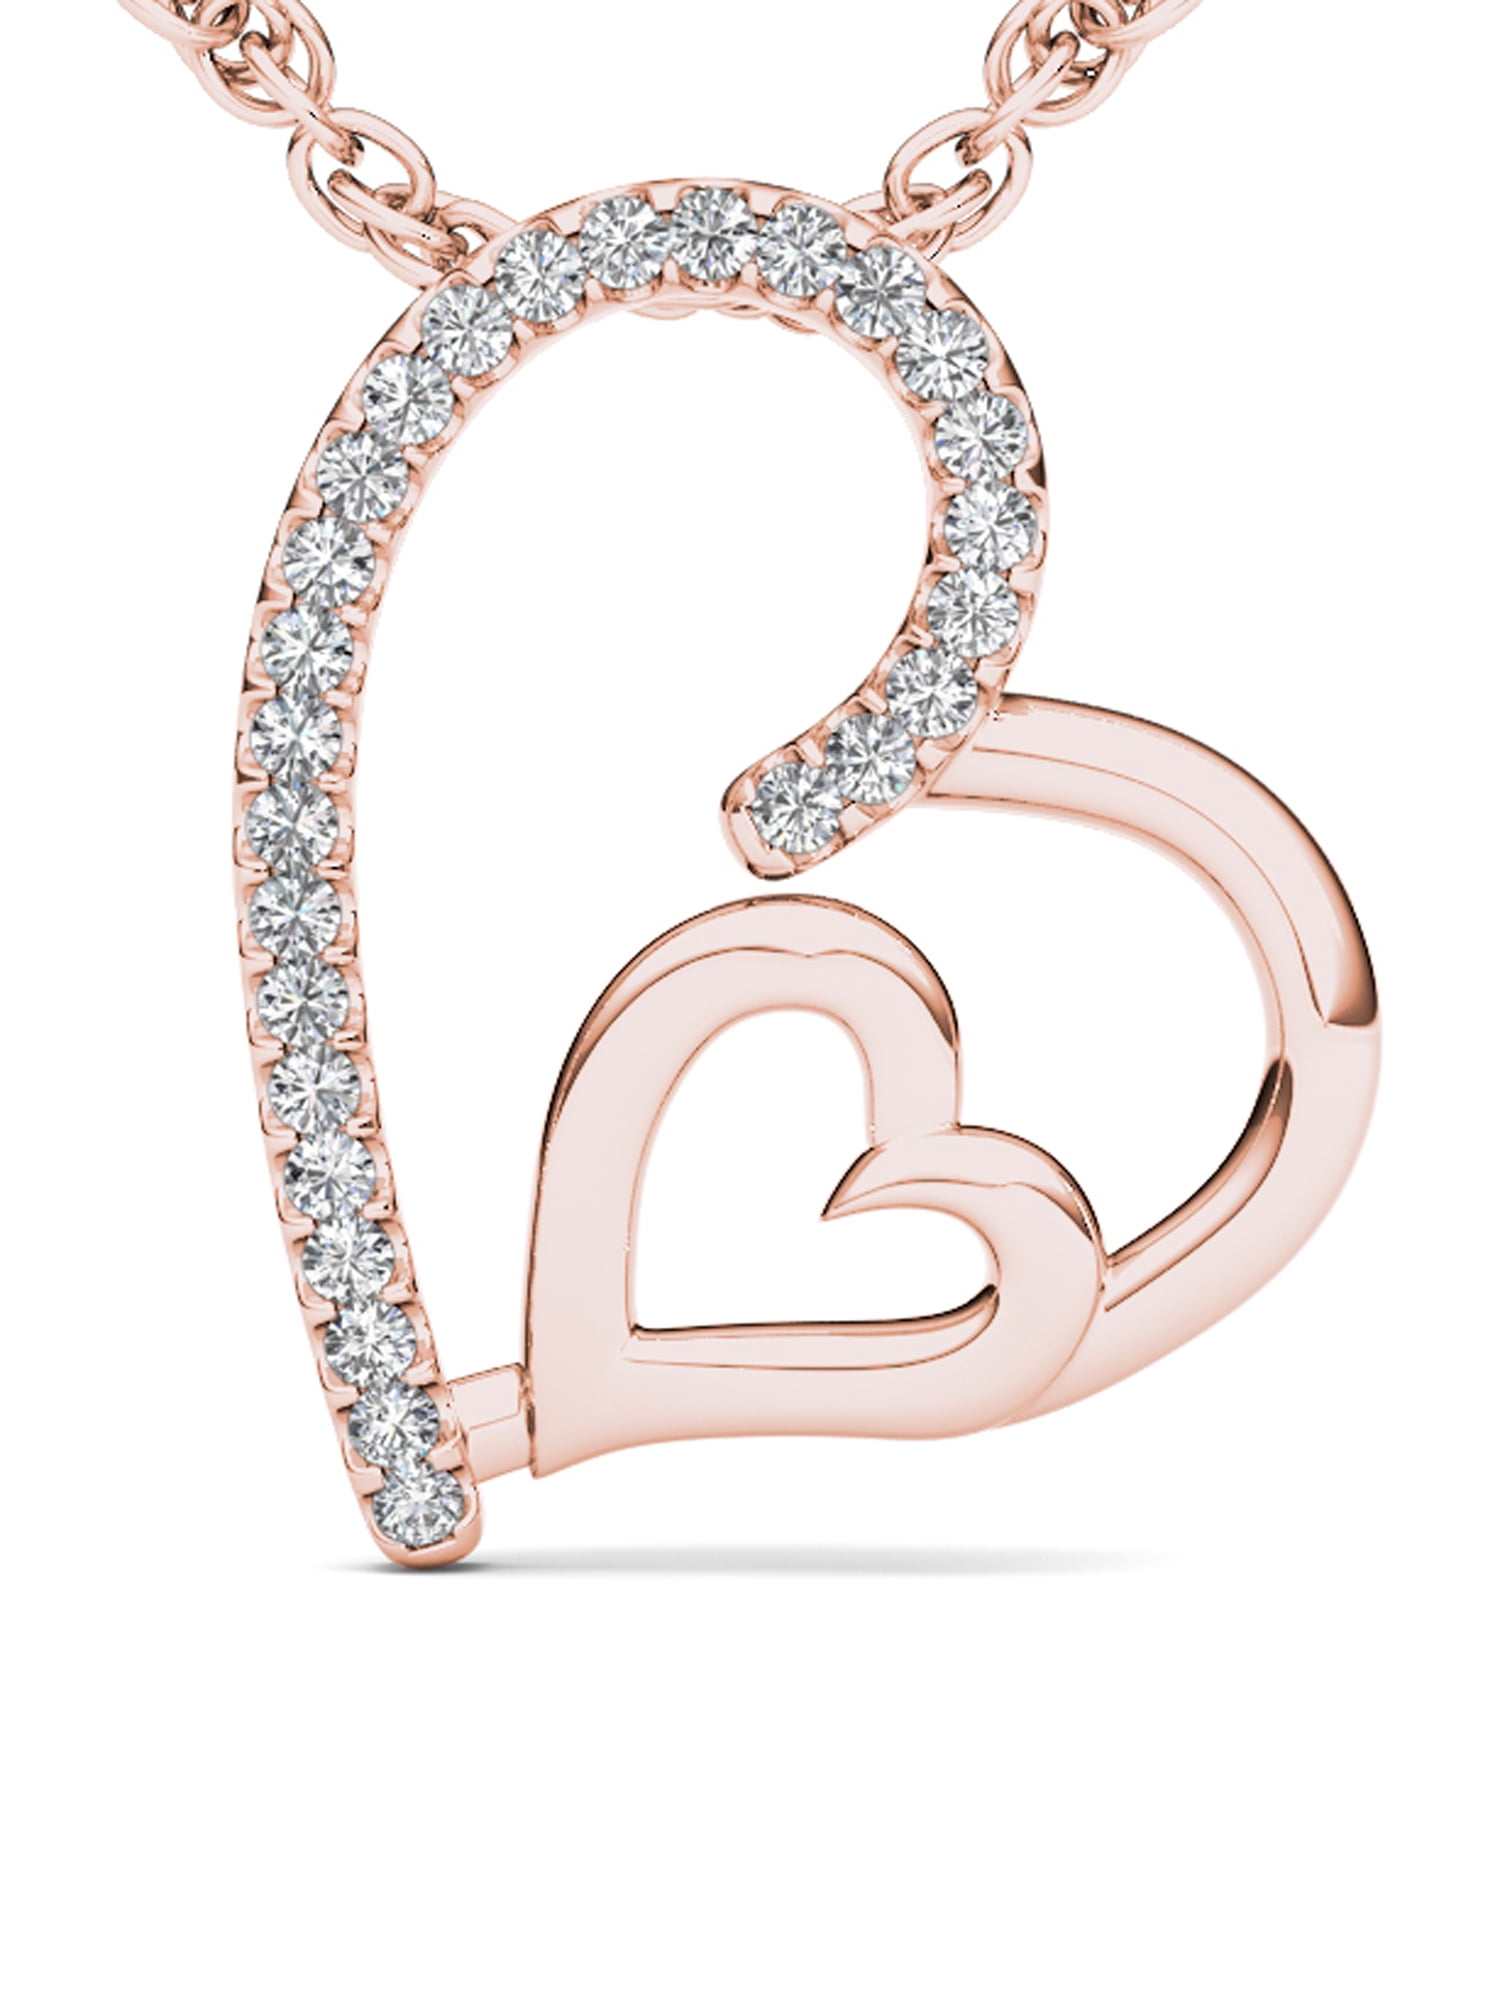 Pink gold necklace with heart-shaped diamond